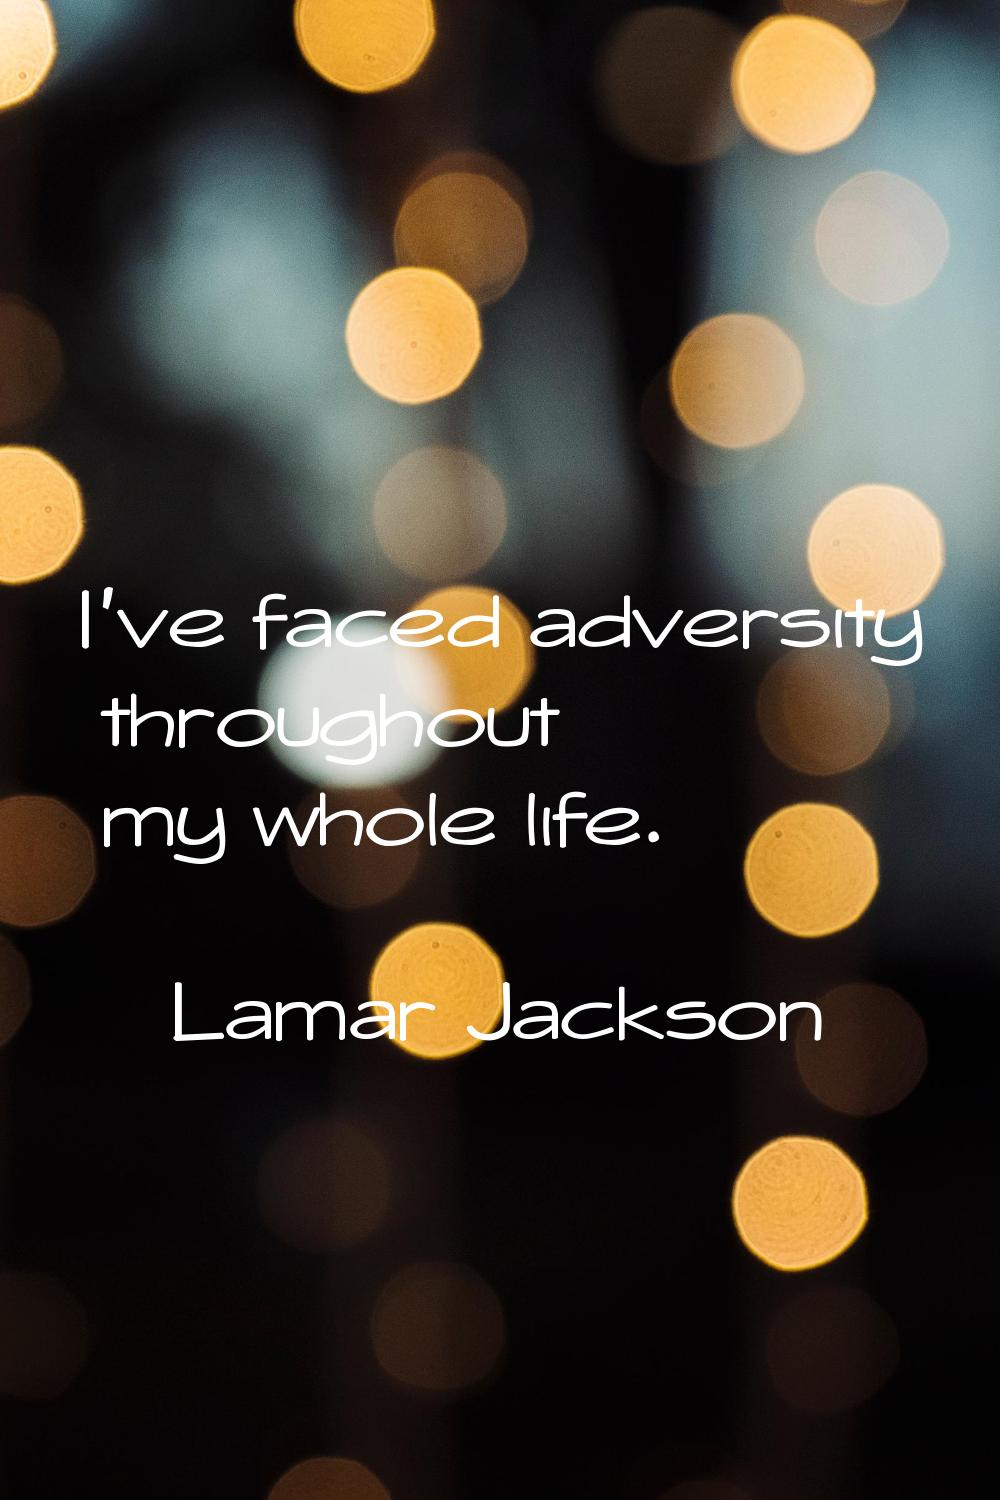 I've faced adversity throughout my whole life.